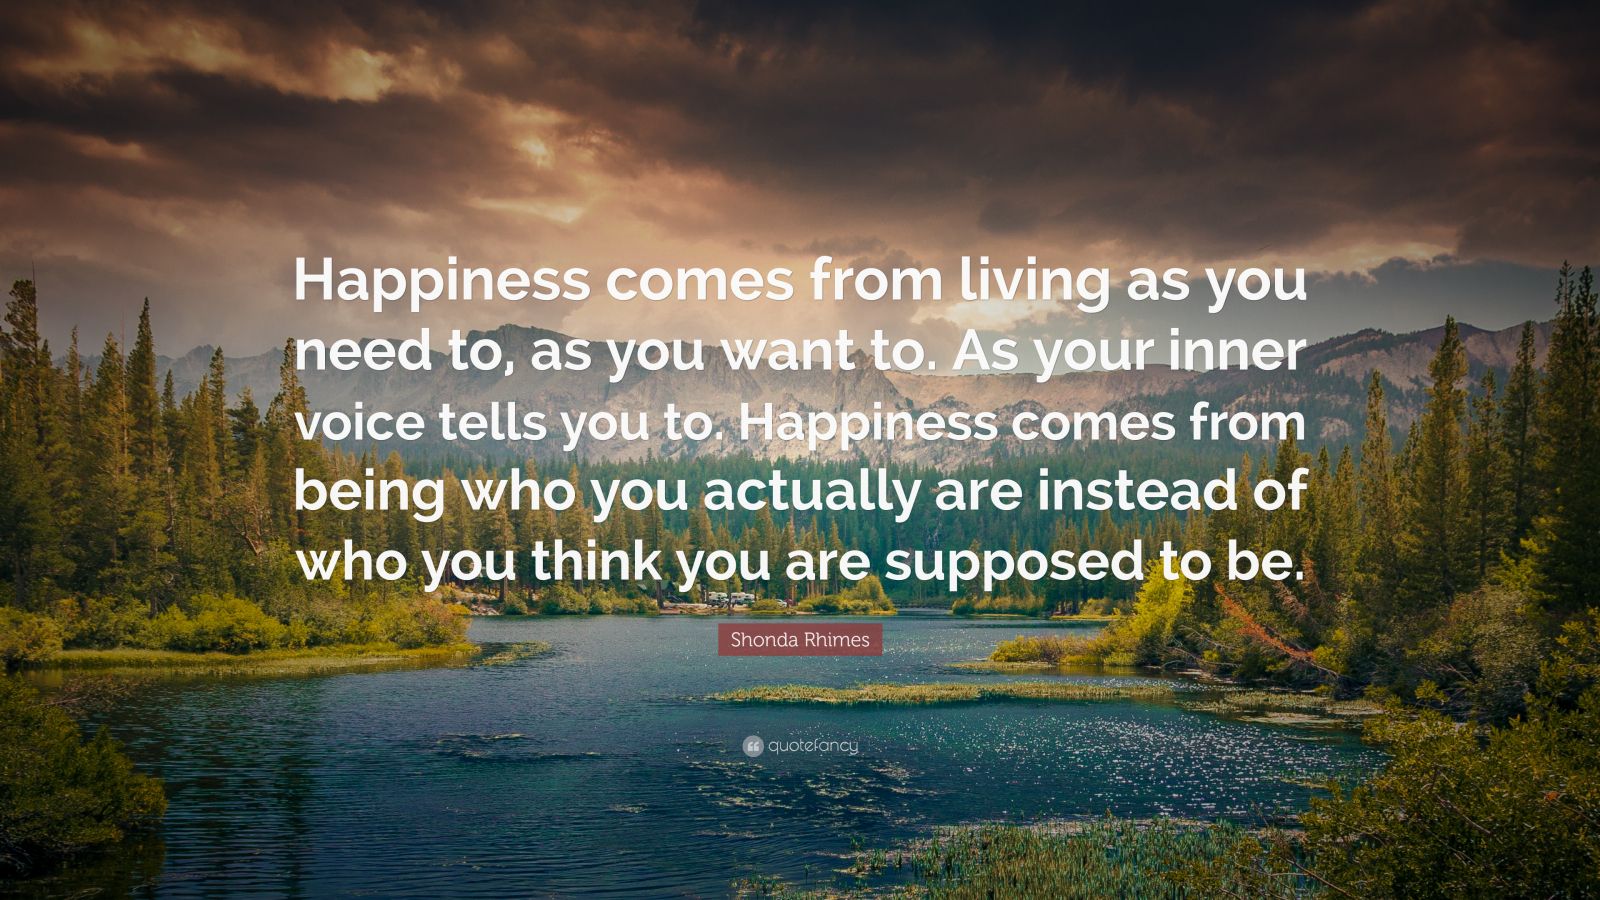 Shonda Rhimes Quote: “Happiness comes from living as you need to, as ...